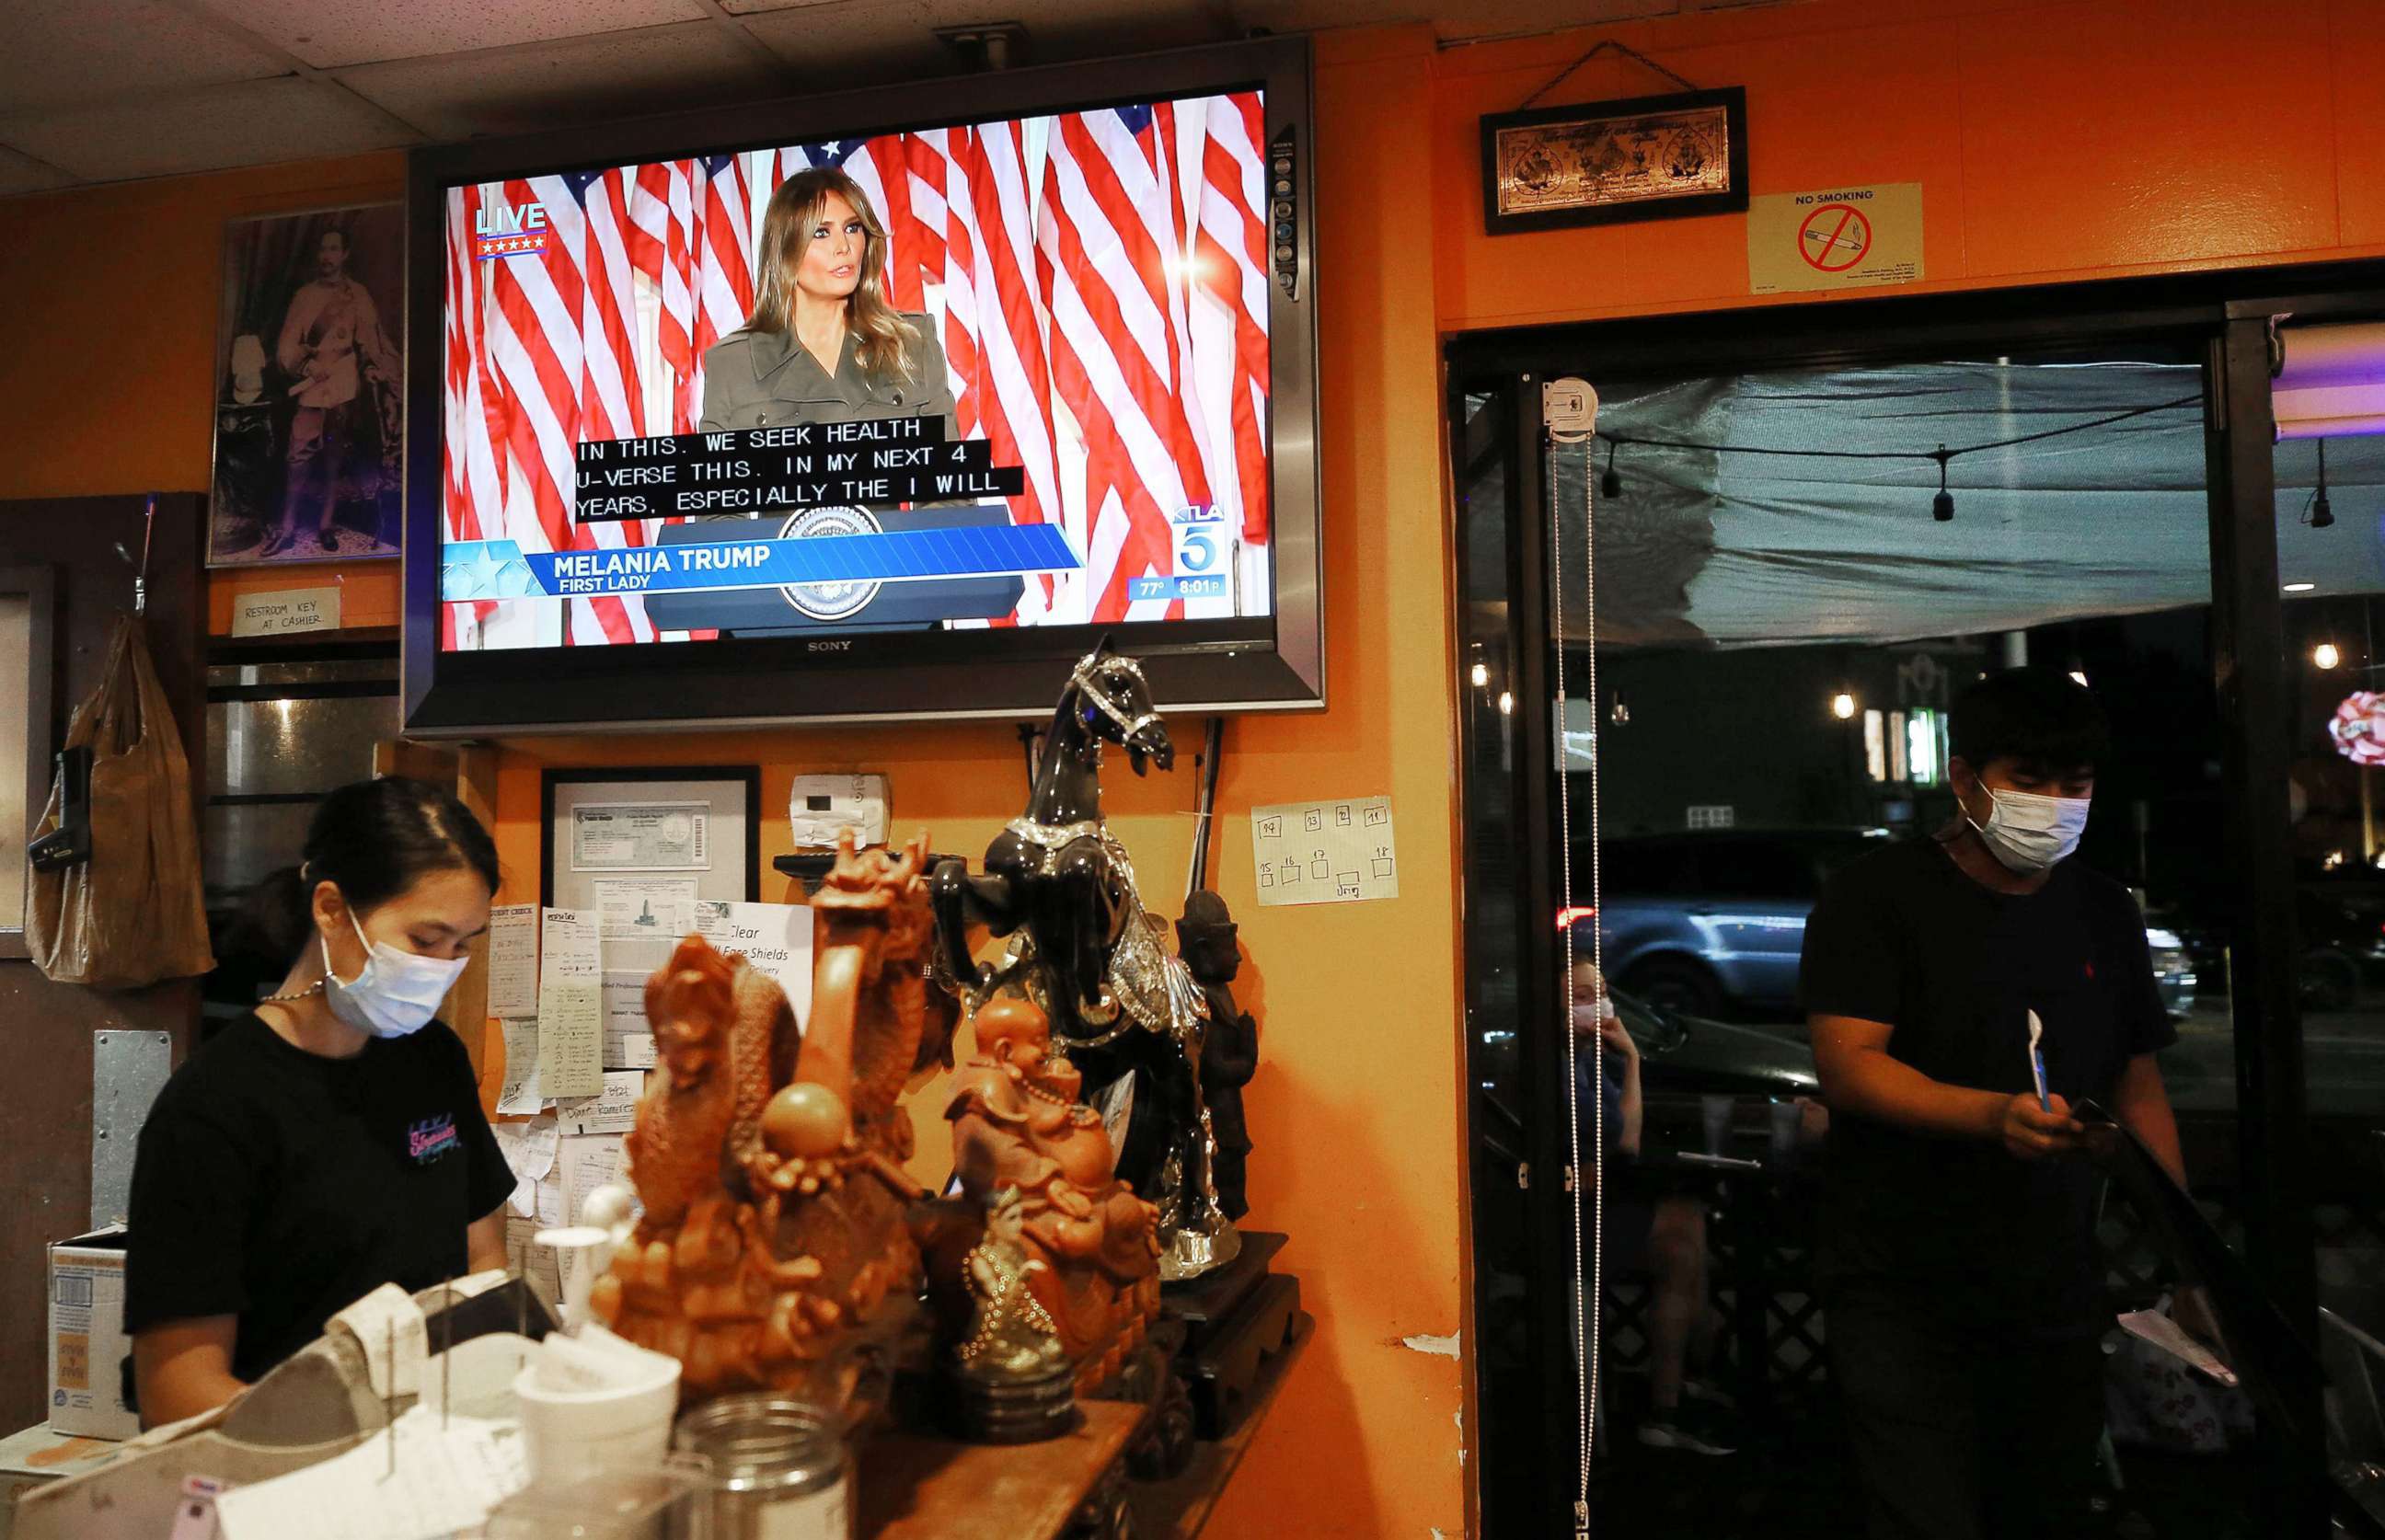 PHOTO: First lady Melania Trump is shown on a TV in a Thai restaurant as she speaks from the White house during the second night of the 2020 Republican National Convention, Aug. 25, 2020, in Los Angeles.